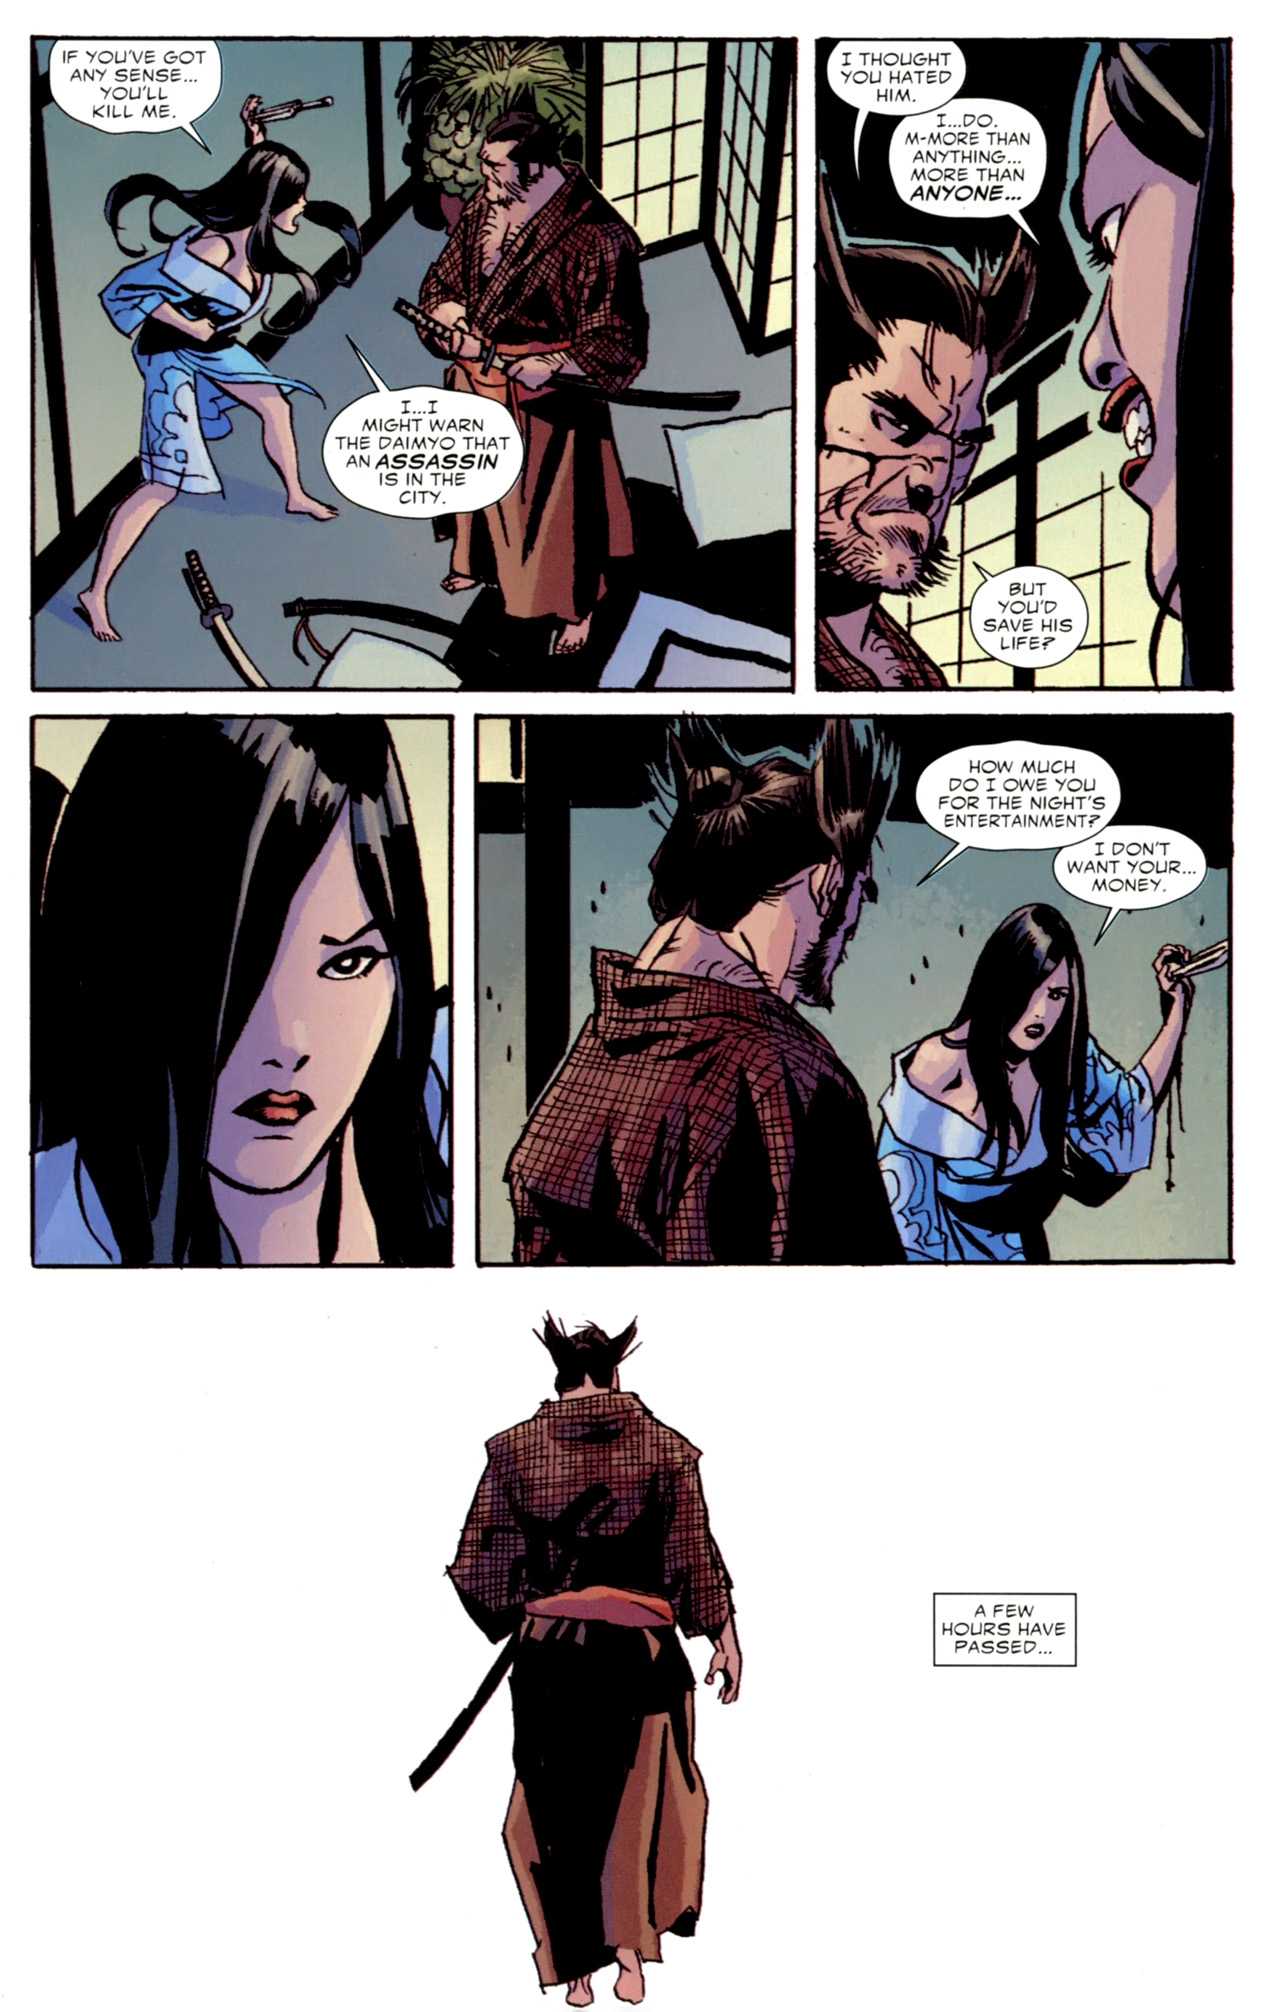 5 Ronin #4 - Chapter Four: The Way Of The Butterfly - Psylocke